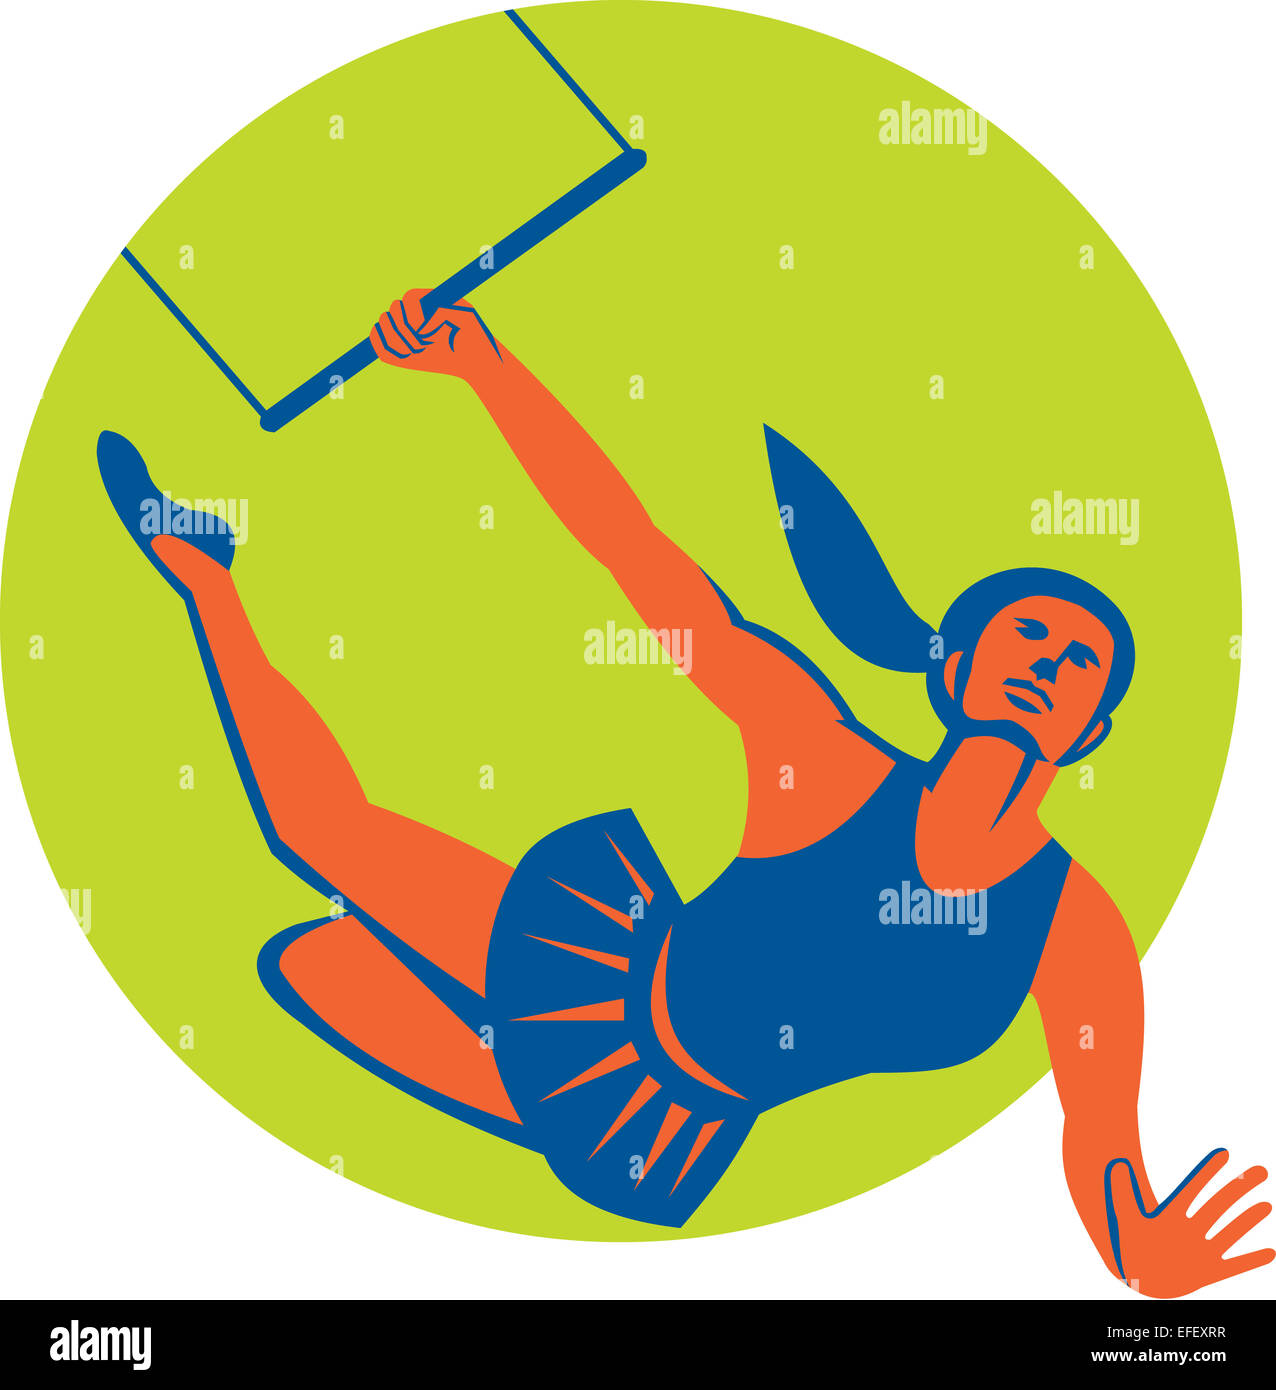 Illustration of an acrobat performing a flying trapeze act set inside circle done in retro style on isolated background. Stock Photo